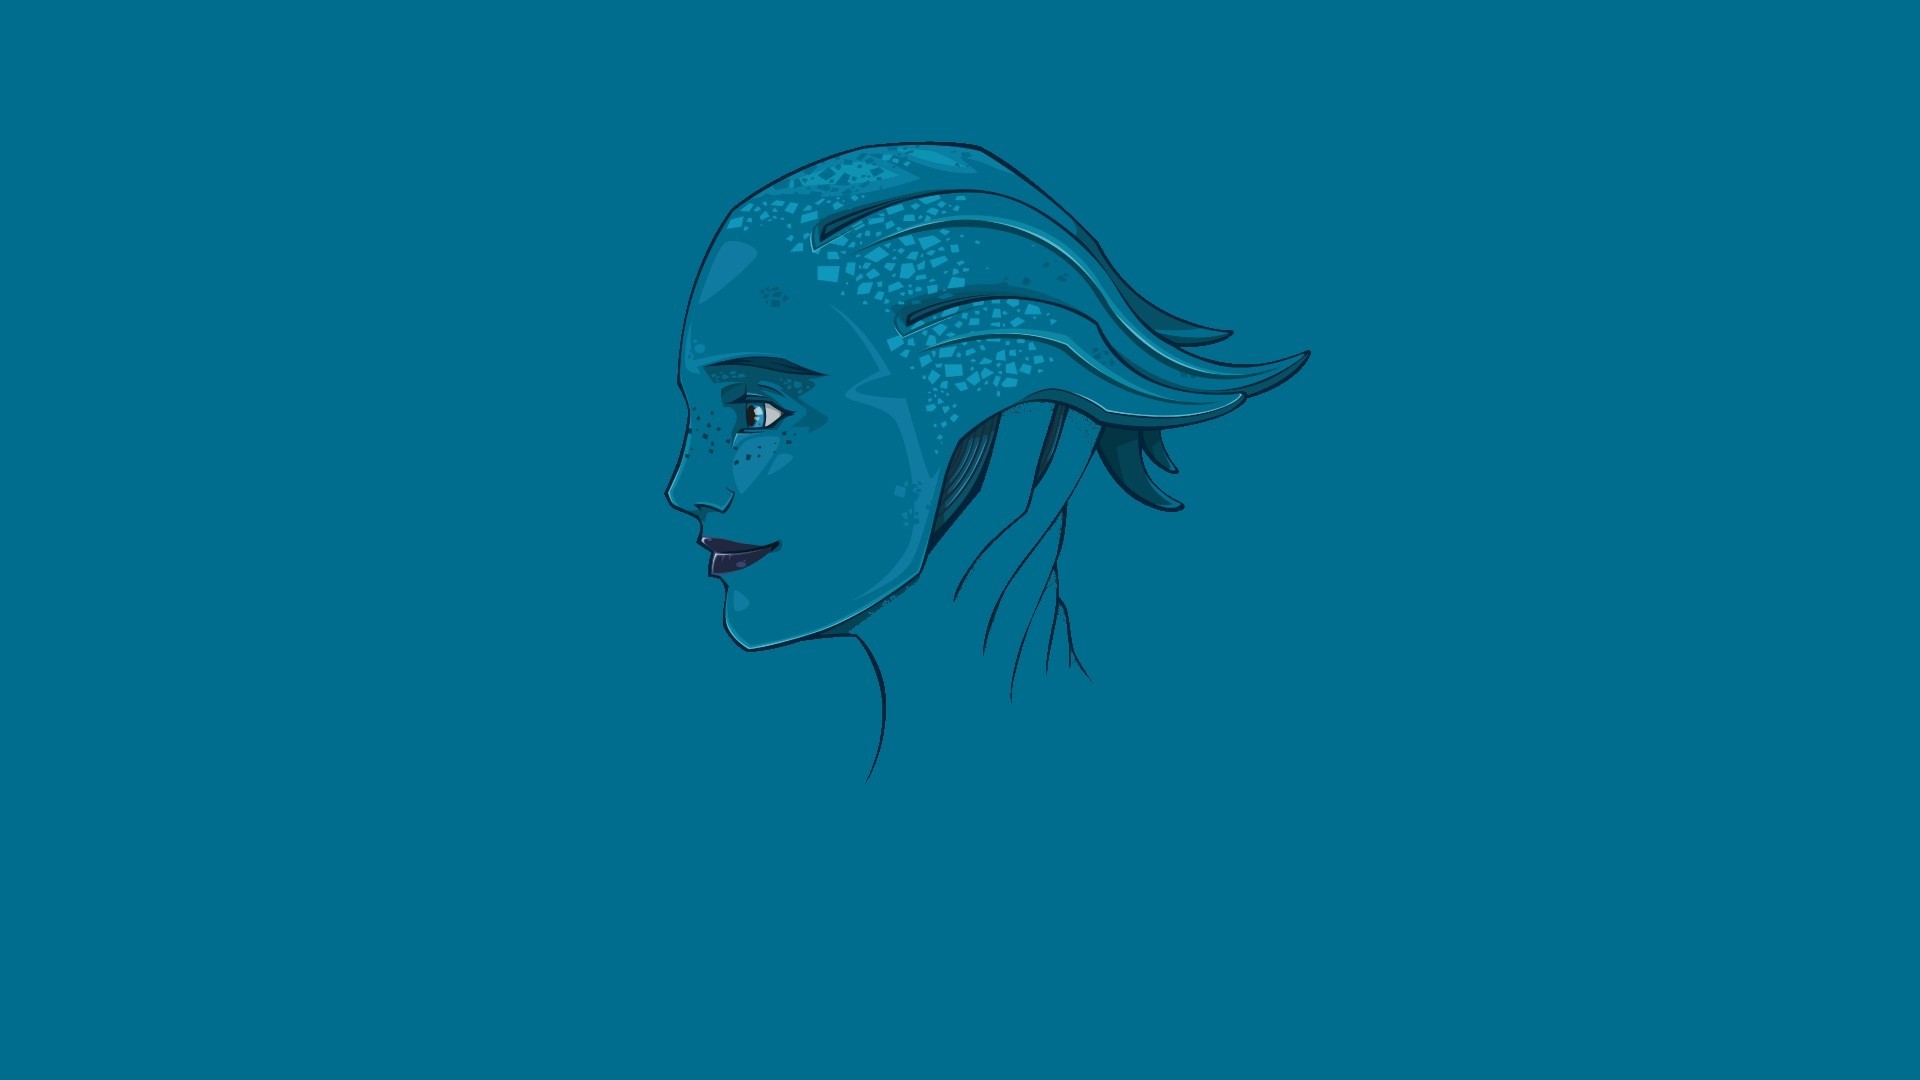 General 1920x1080 Mass Effect Asari video games minimalism blue background profile face science fiction Liara T'Soni PC gaming video game art video game girls